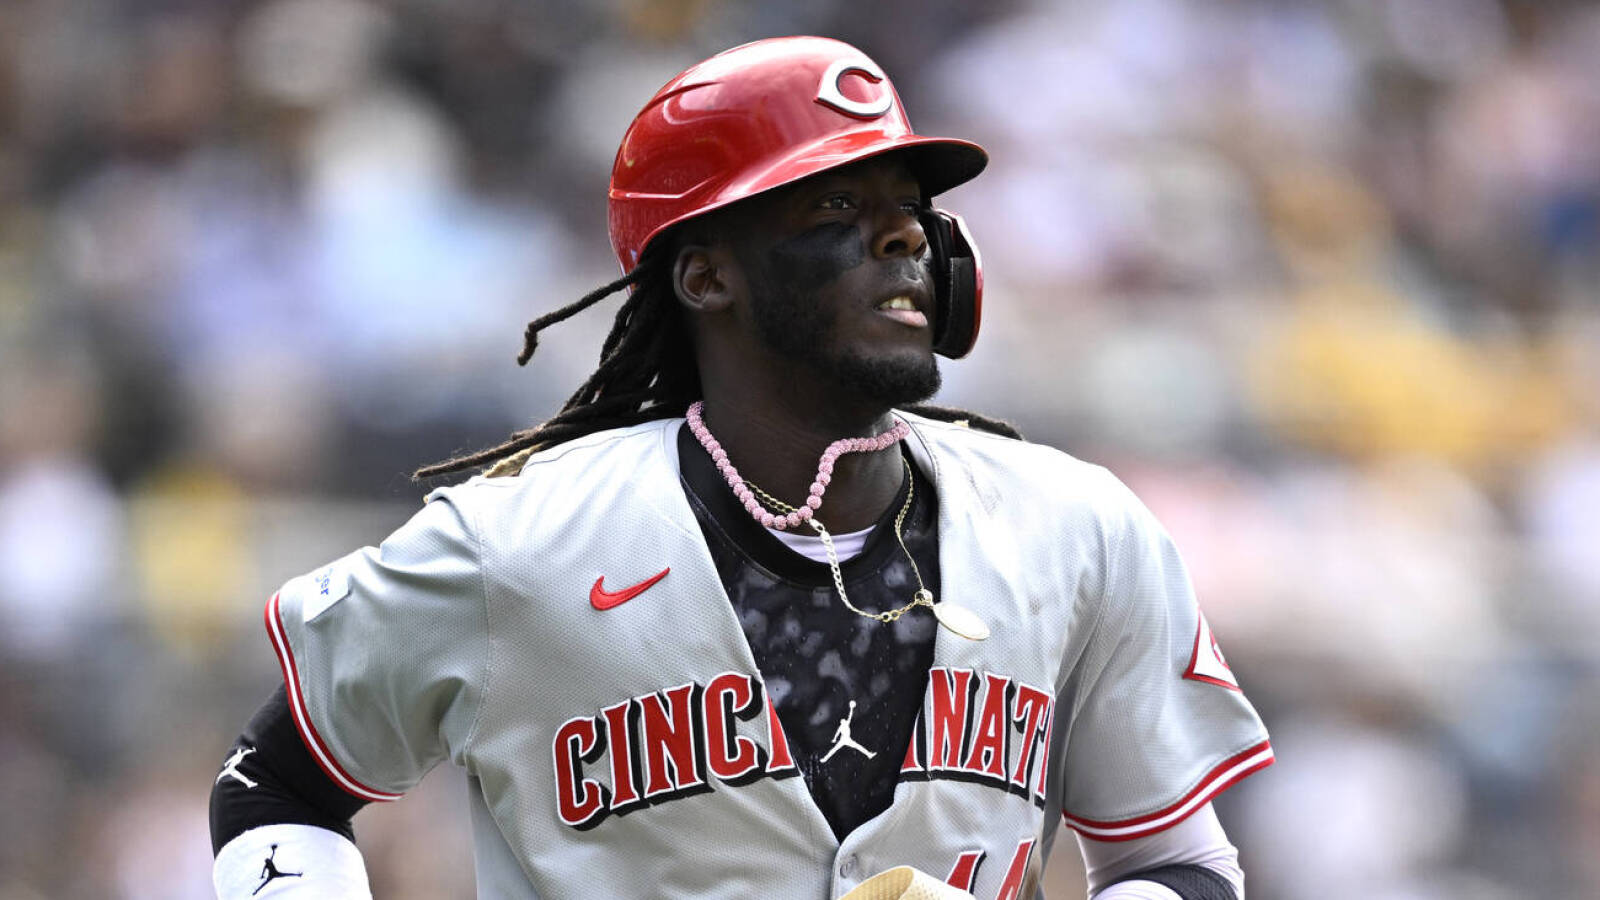 Reds star shortstop on pace for historic season